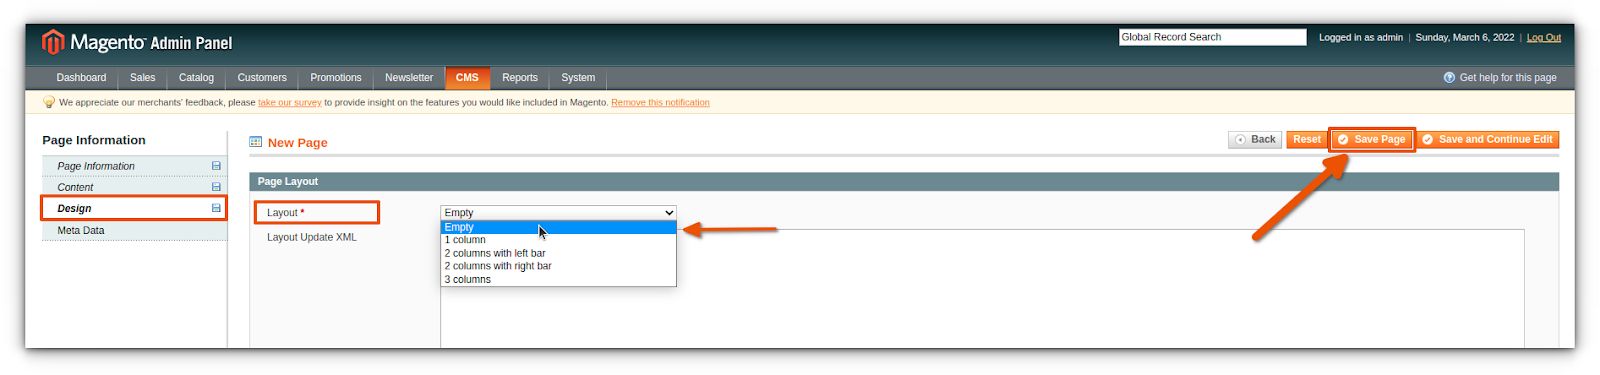 Next, go to Design under Page information. Click Layout and select Empty from the dropdown menu. Then, save the page.